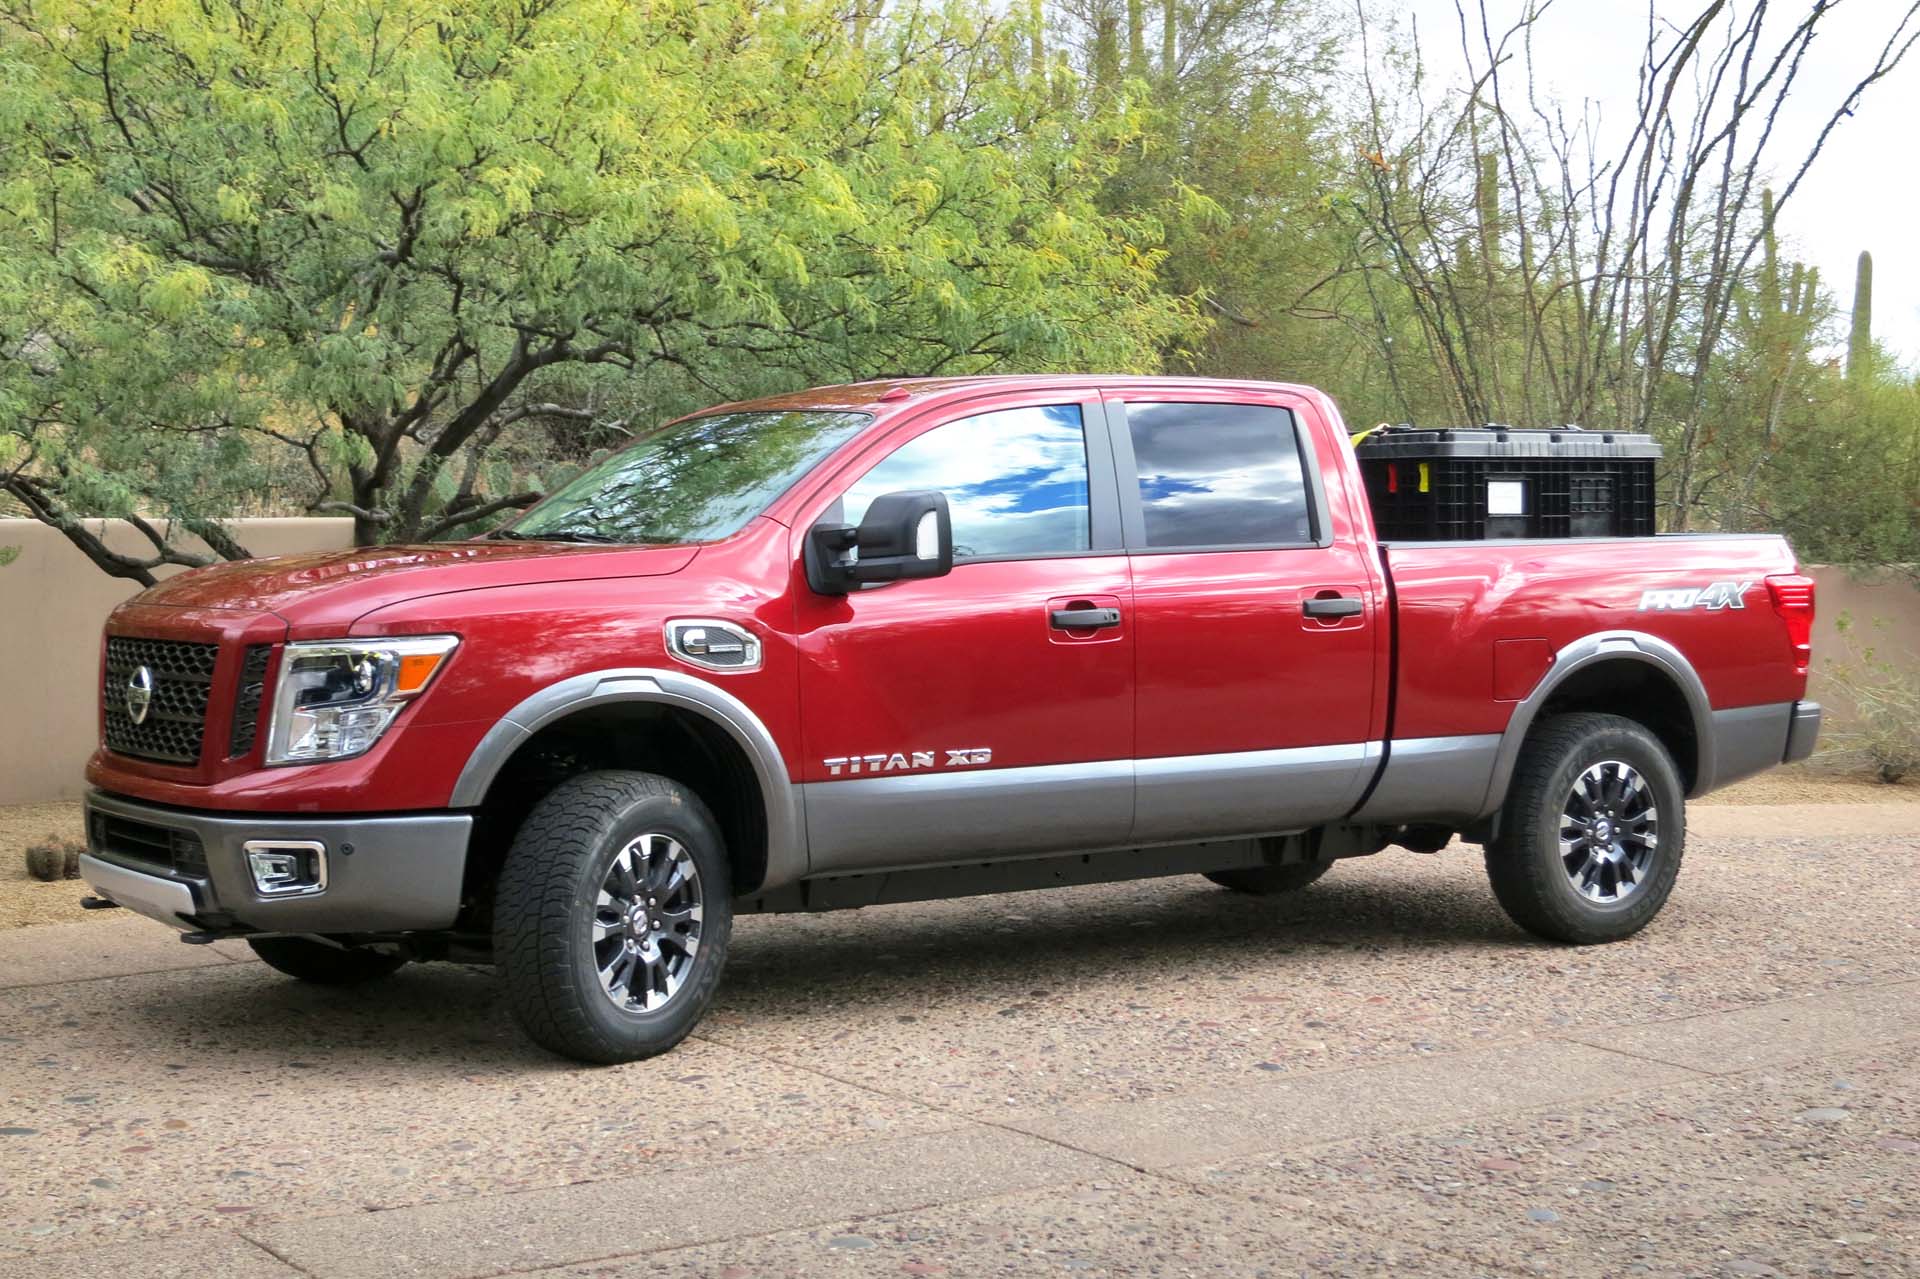 Heavy duty pickups are now posting big-rig tow ratings of just over 13,600 kg (30,000 lb). While the Titan XD's max towing capacity of 5,443 kg (12,300 lb) doesn't even come close to those numbers, at 100 lb more than the highest rated light duty truck (F-150), it does bridge the gap nicely. It also boasts such heavy duty features as engine braking, integrated trailer braking and sway control. Payload for the Crew Cab Titan XD 4x4 is 949 kg (2,093 lb).